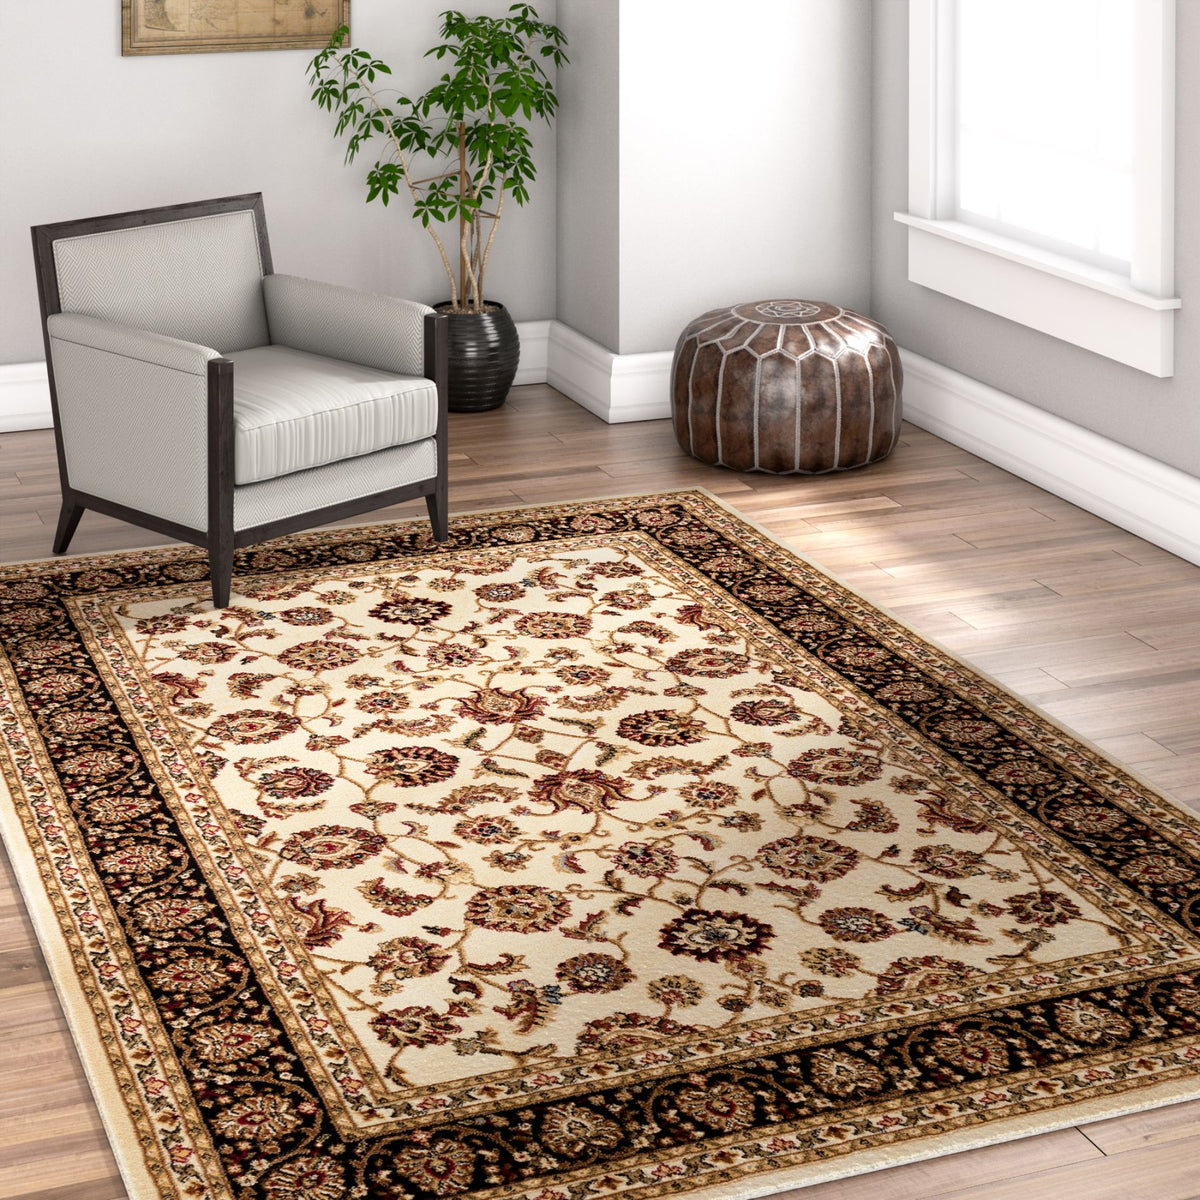 Noble Sarouk Ivory Persian Floral Oriental Formal Traditional Area Rug